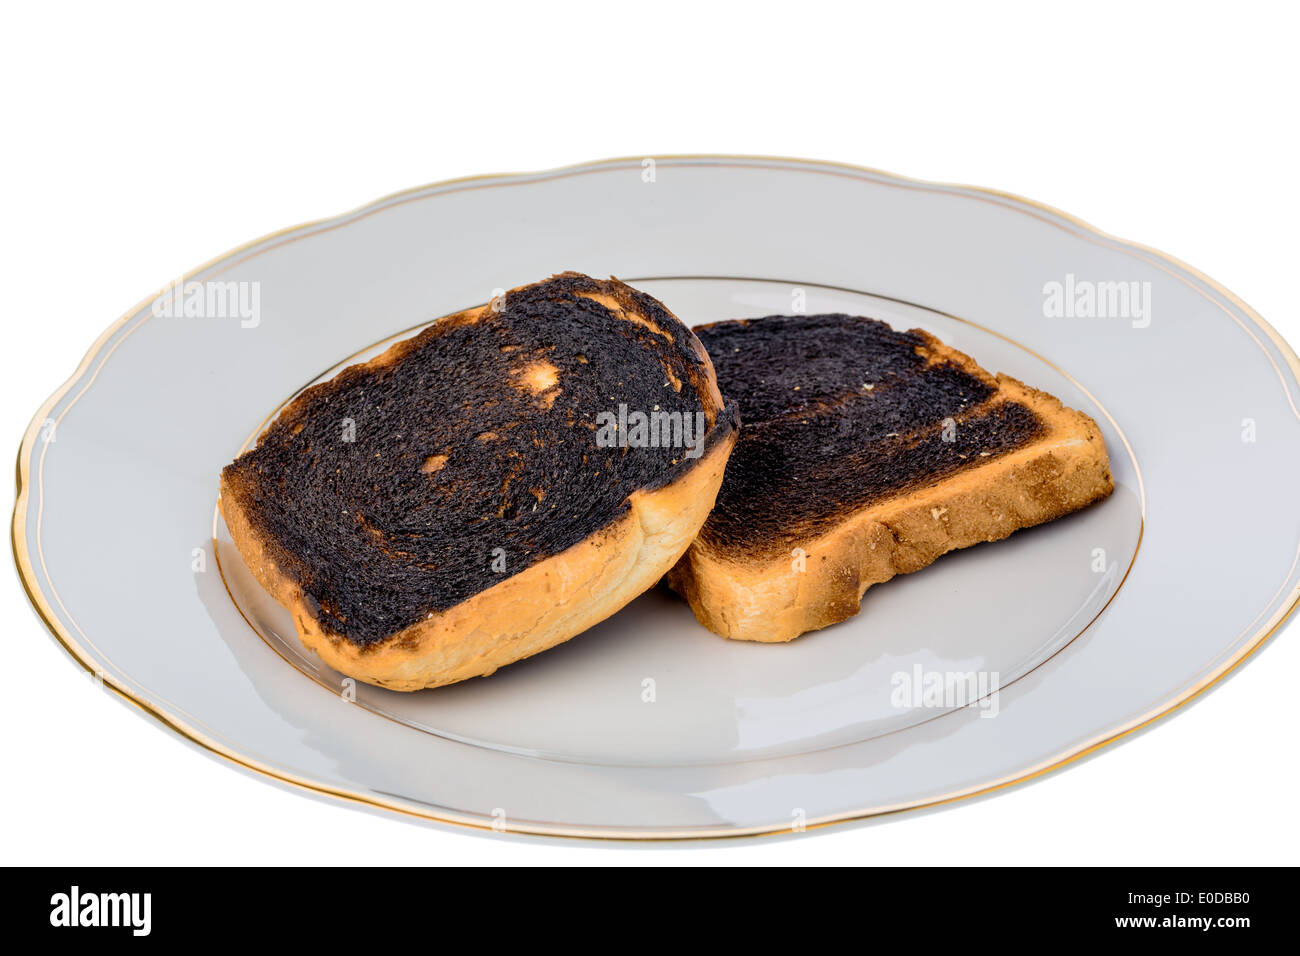 Toast bread became burntly. Burntly toast discs with the breakfast., Toastbrot wurde beim toasten verbrannt. Stock Photo